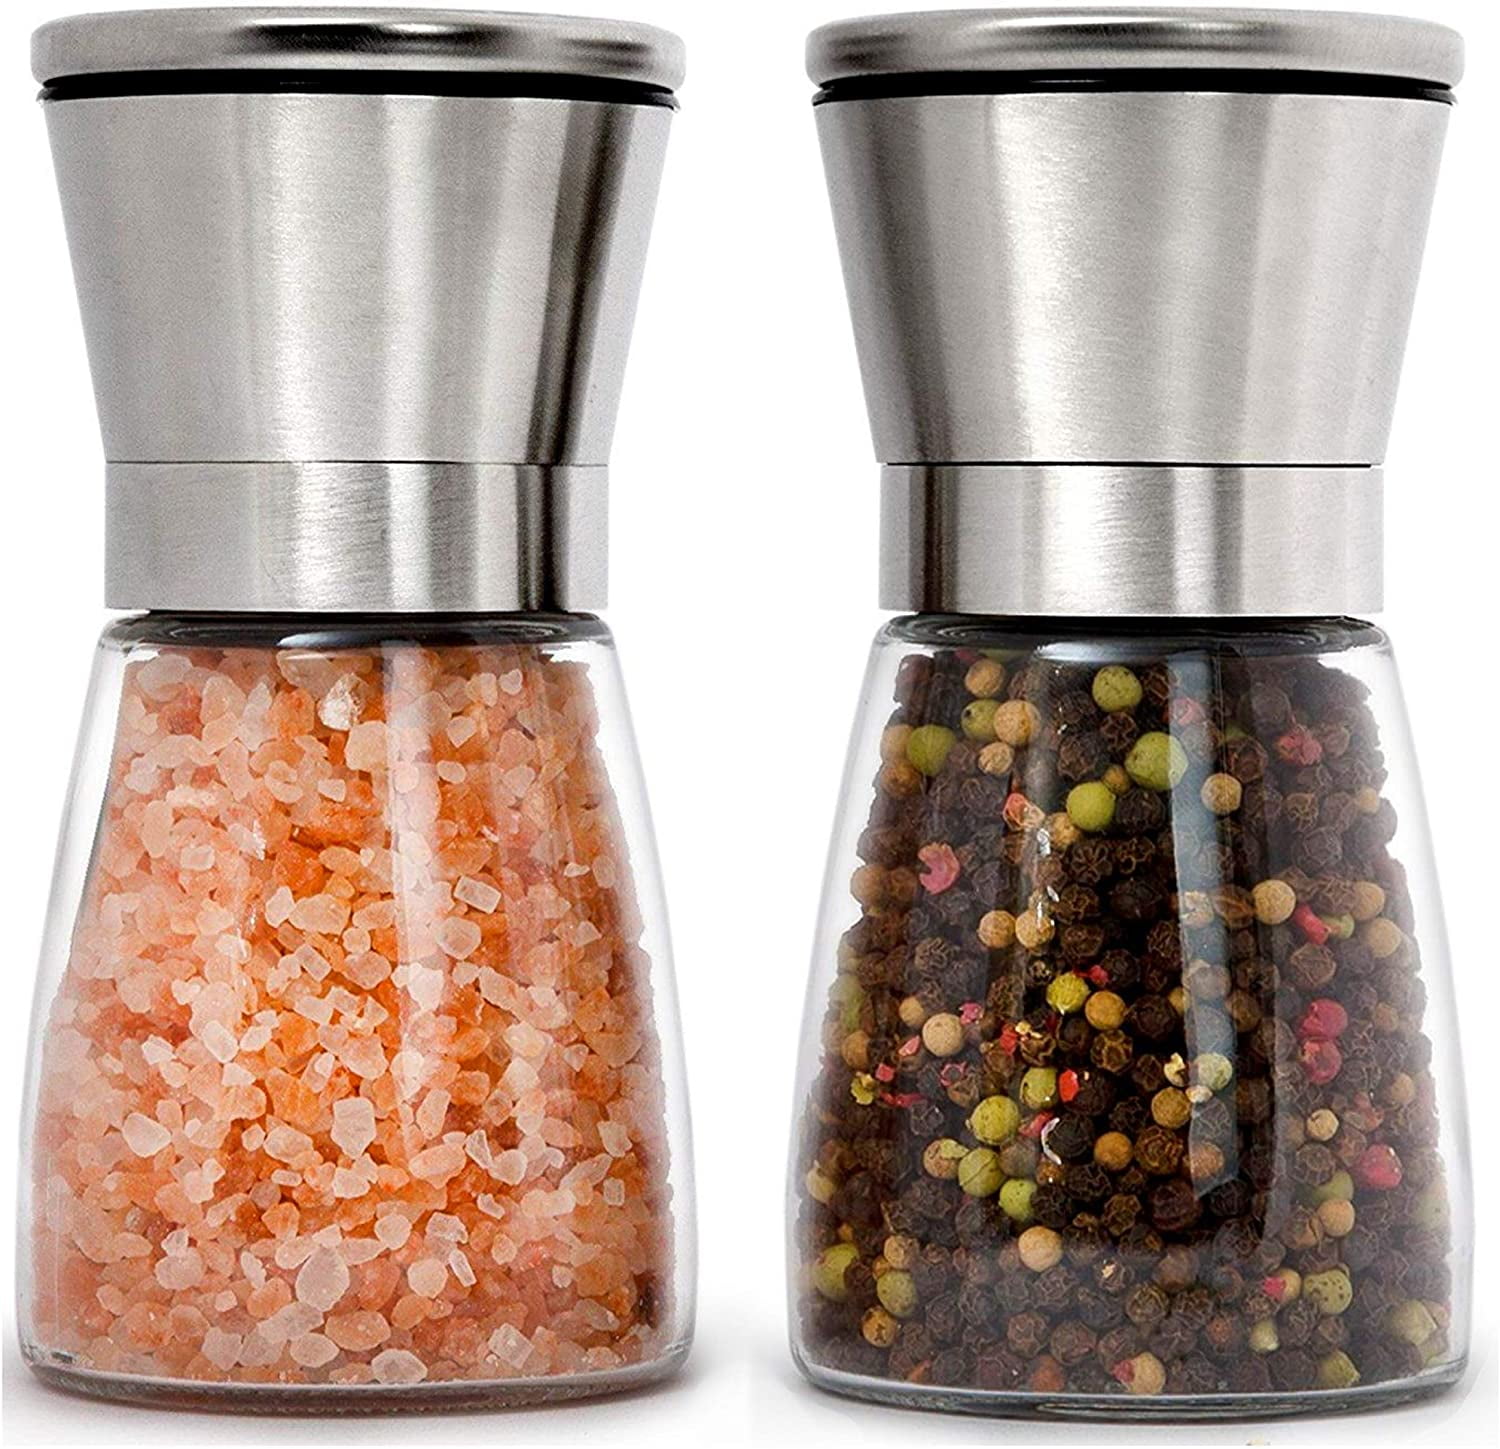 Ceramic Grinder Core Salt Pepper Mill Blades Replacement Parts 3-Pack Spices NEW 